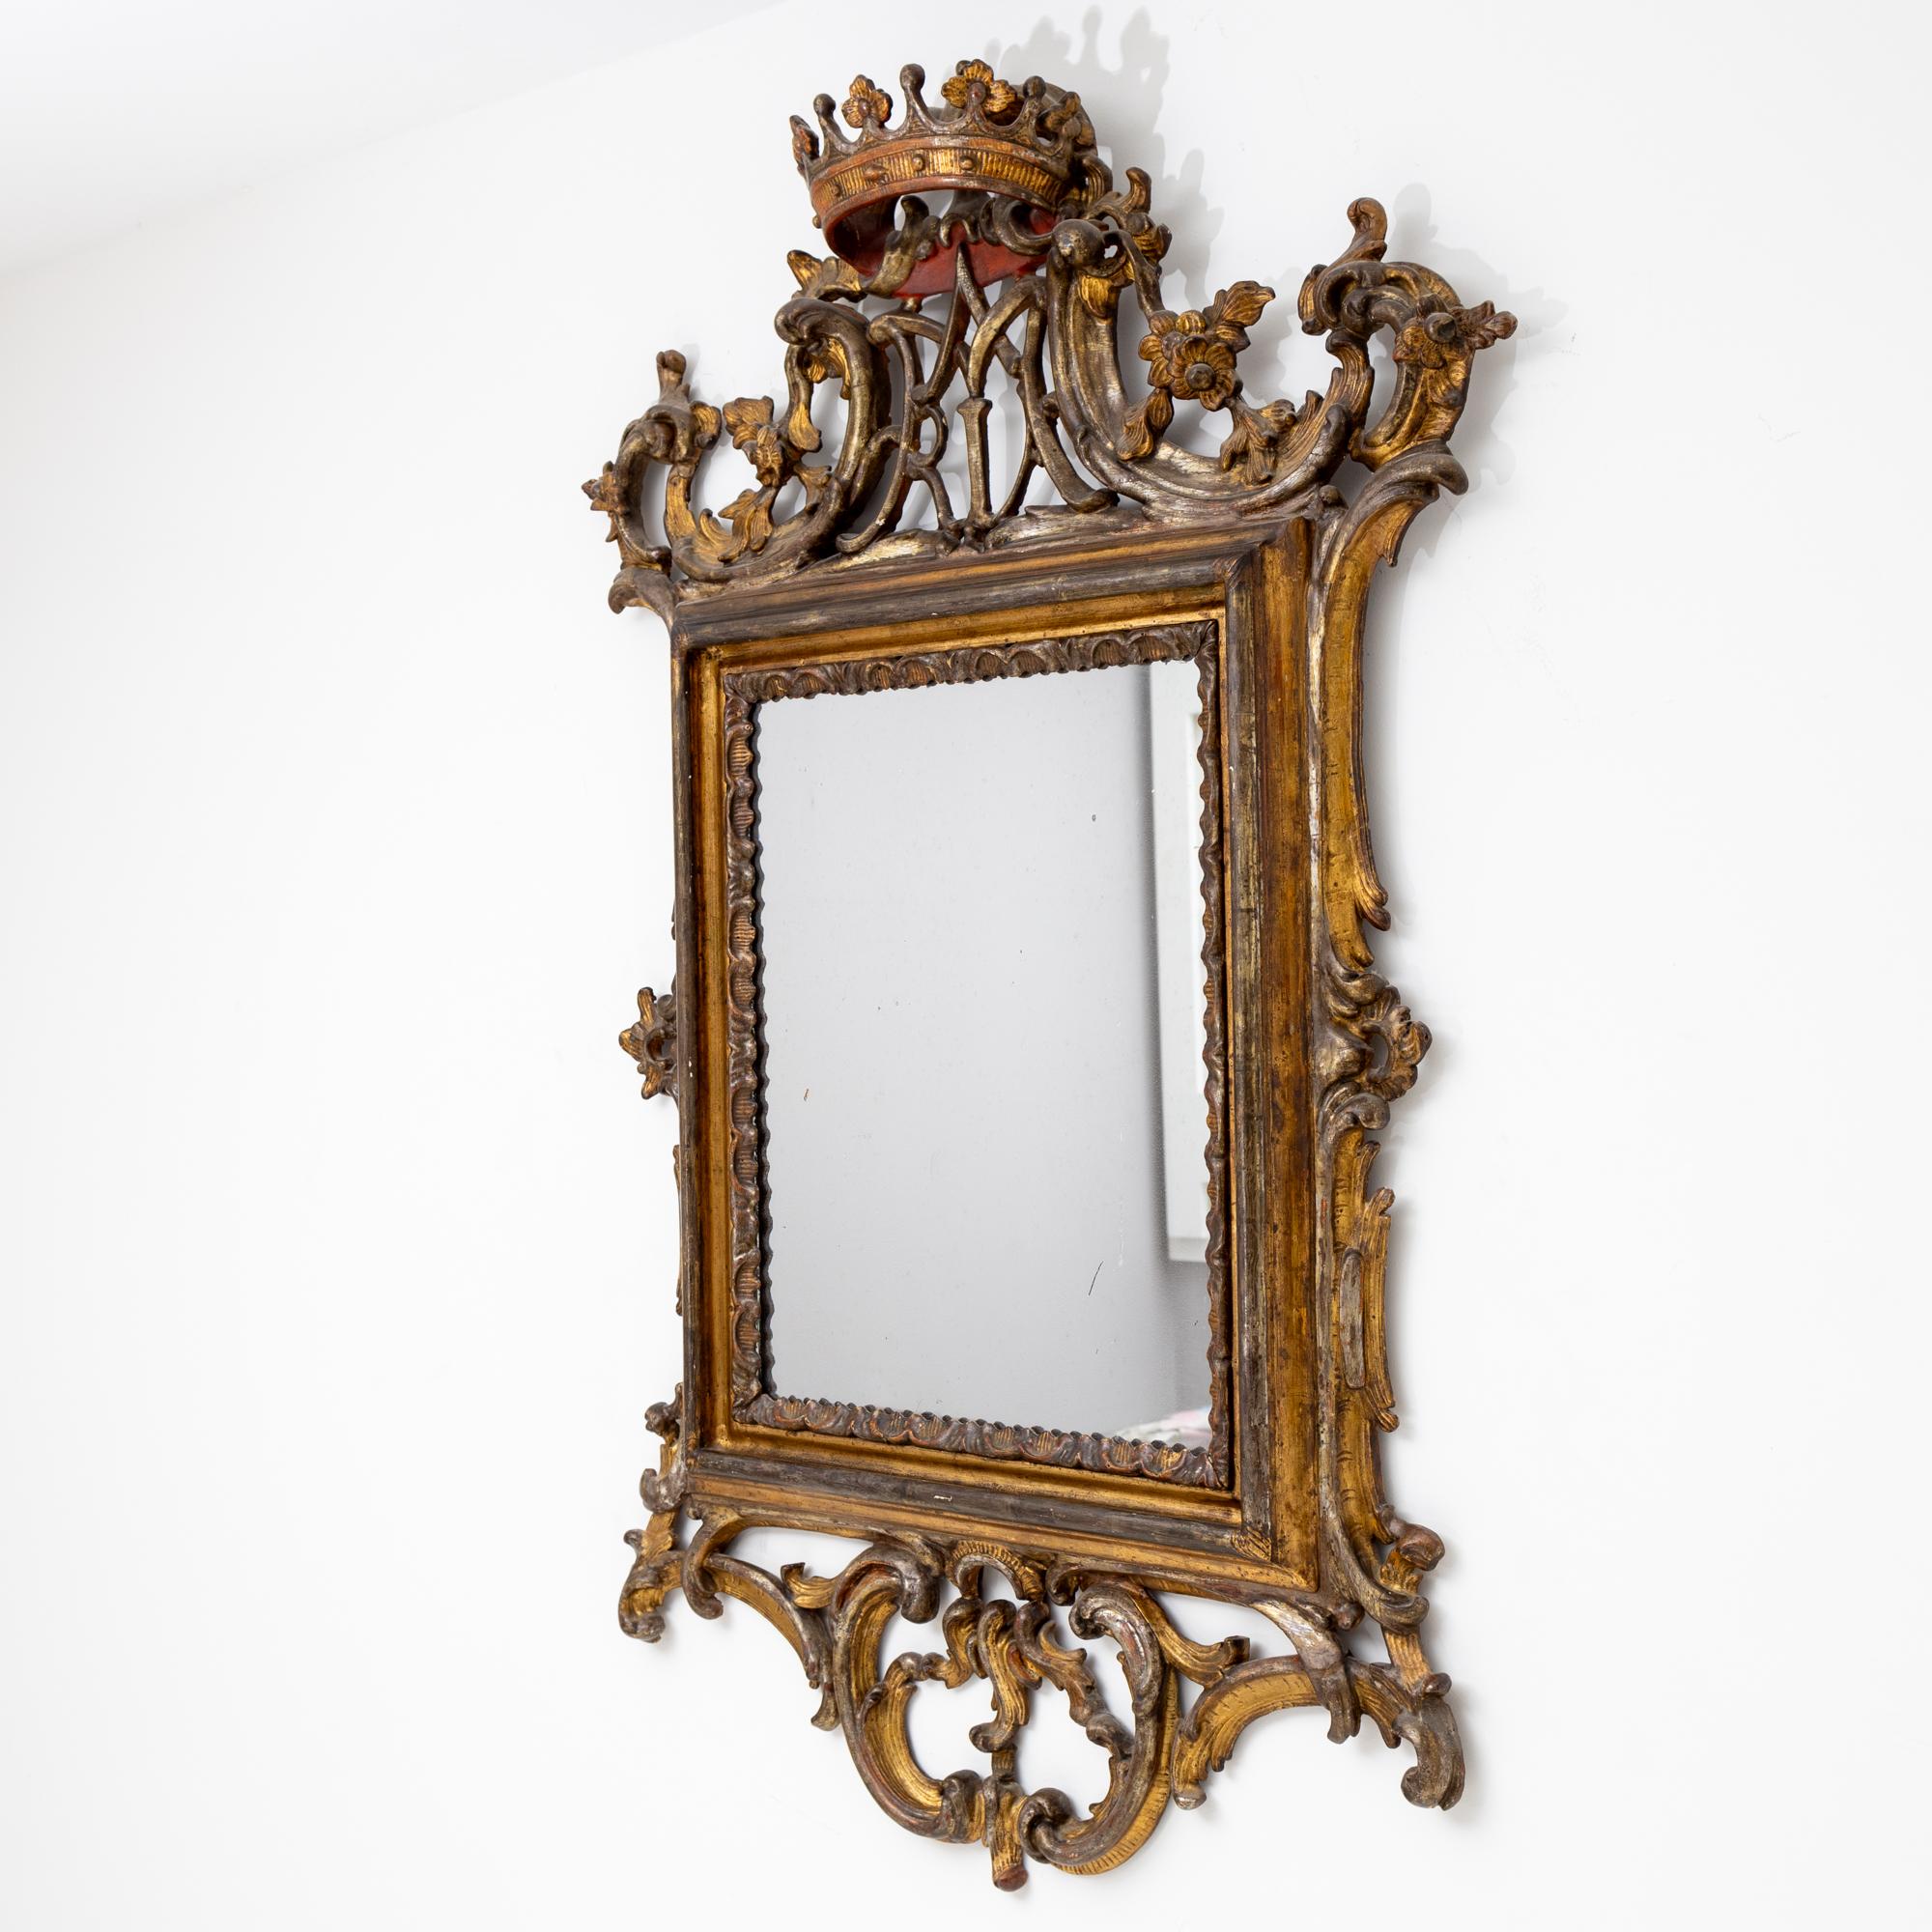 Glass Rococo wall mirror with Mary monogram, 18th century